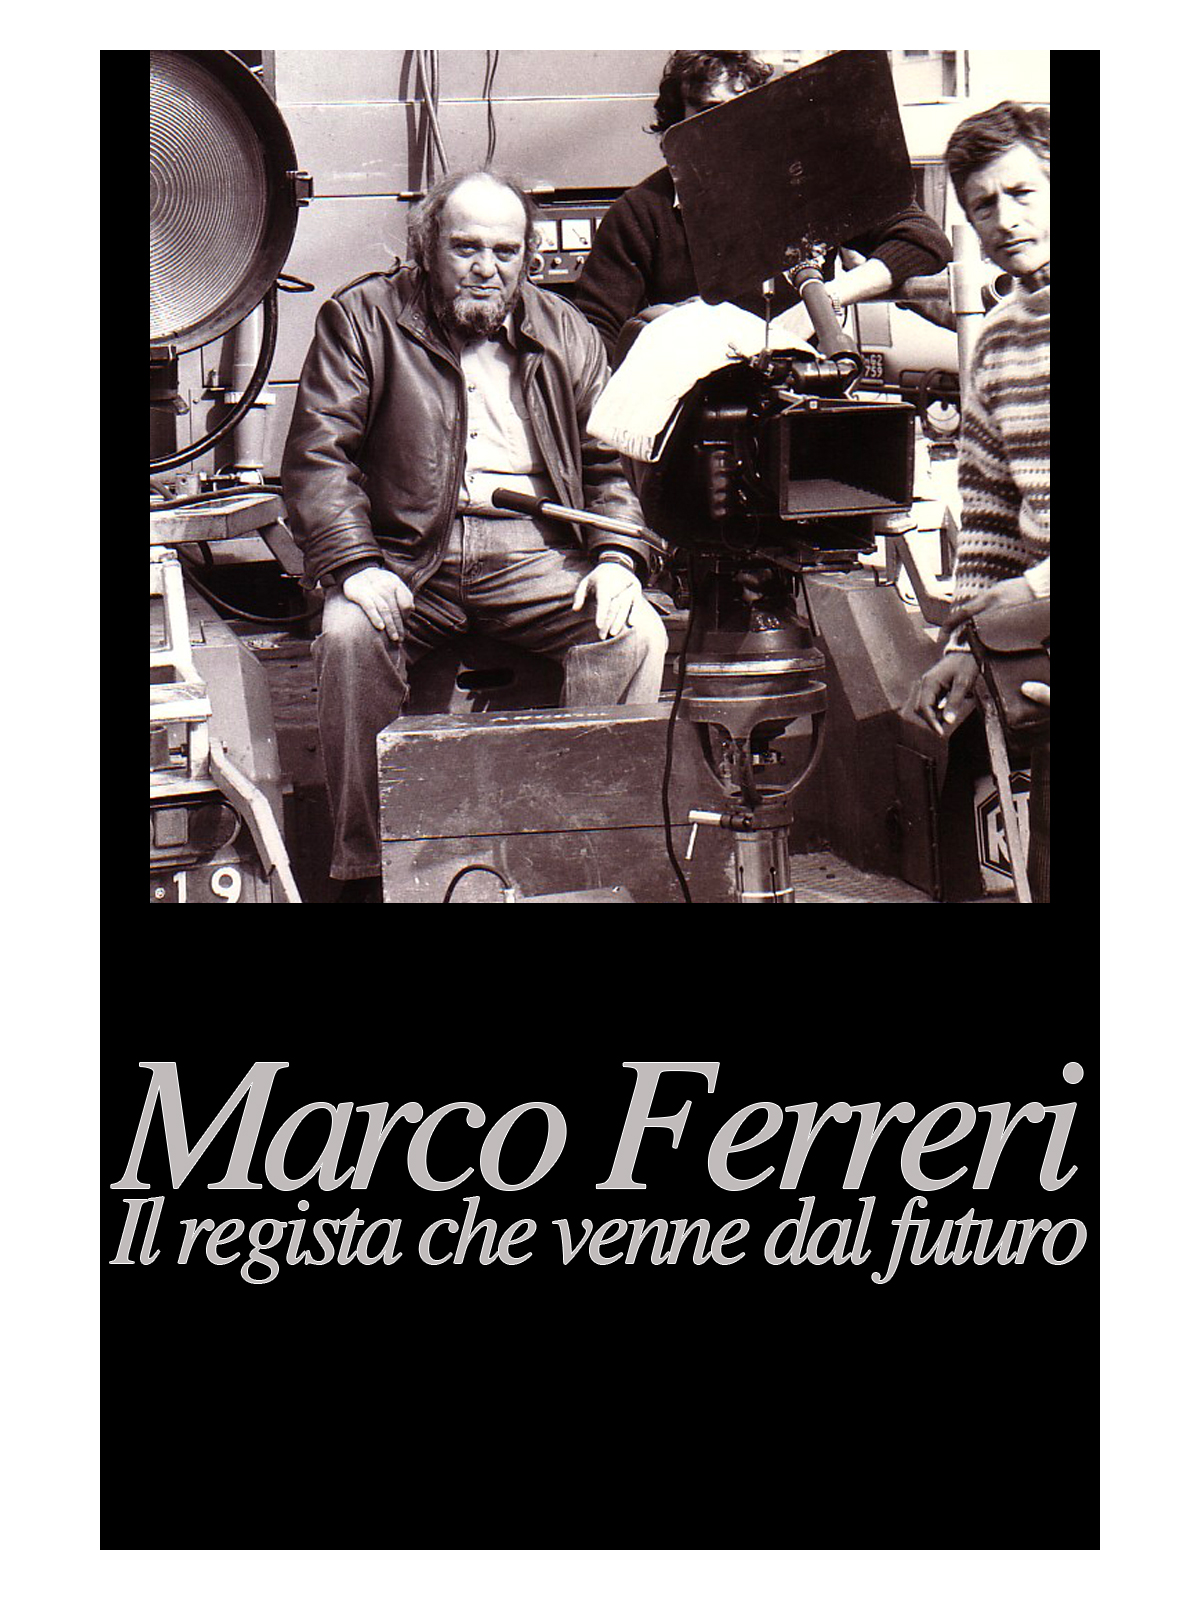 Marco Ferreri: The Director Who Came from the Future